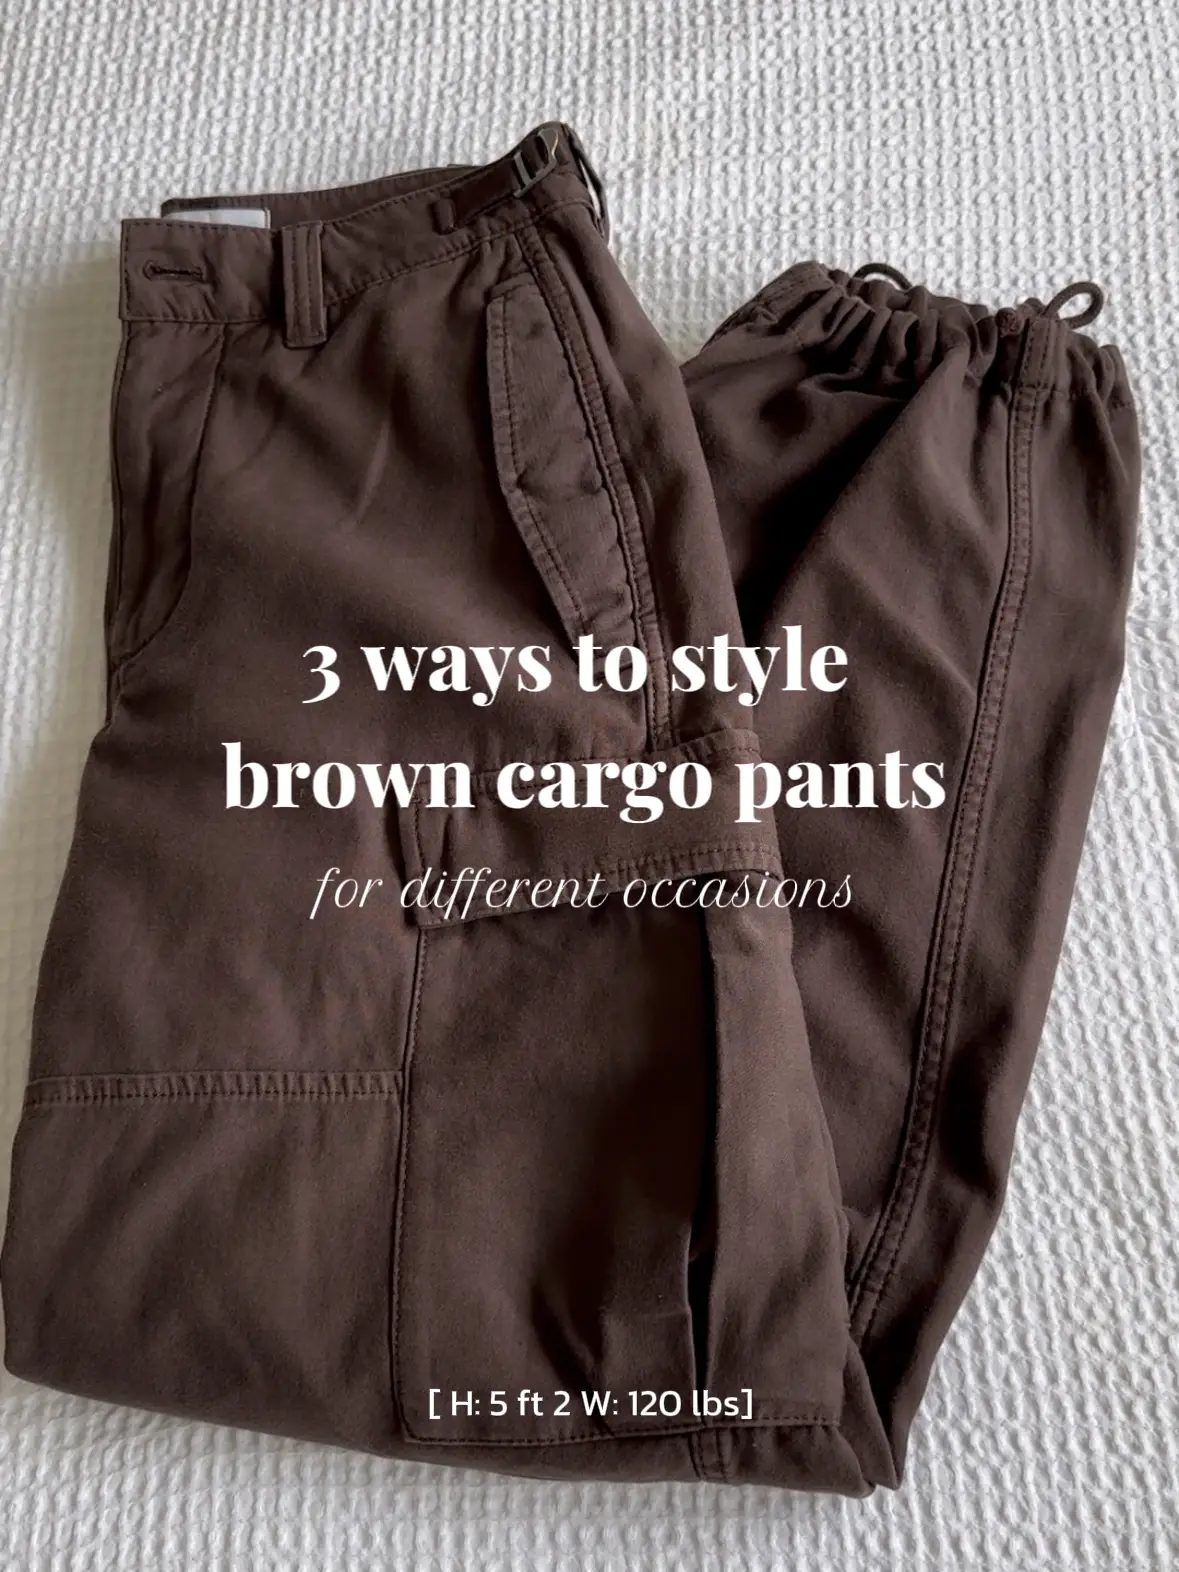 Green Cargo Pants Styling Tips - FashionActivation